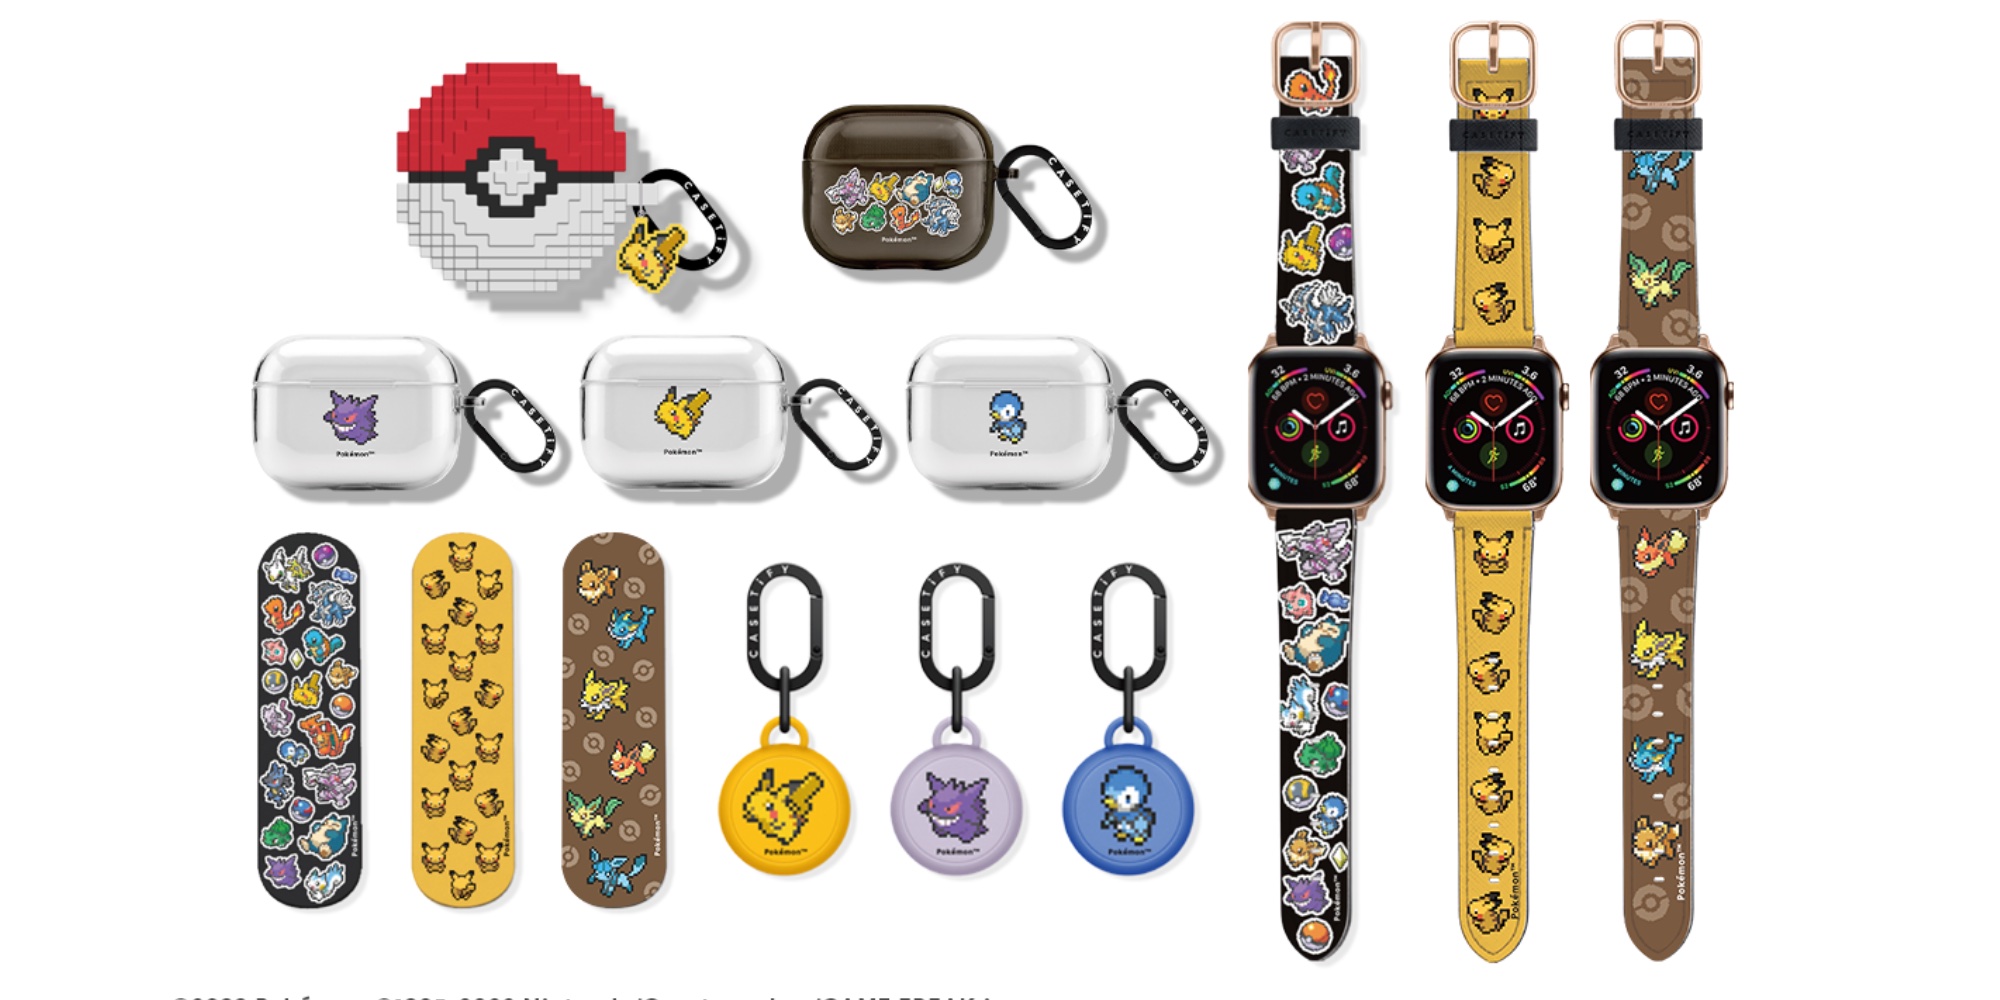 Pokémon CASETiFY iPhone 13 cases coming soon - 9to5Toys